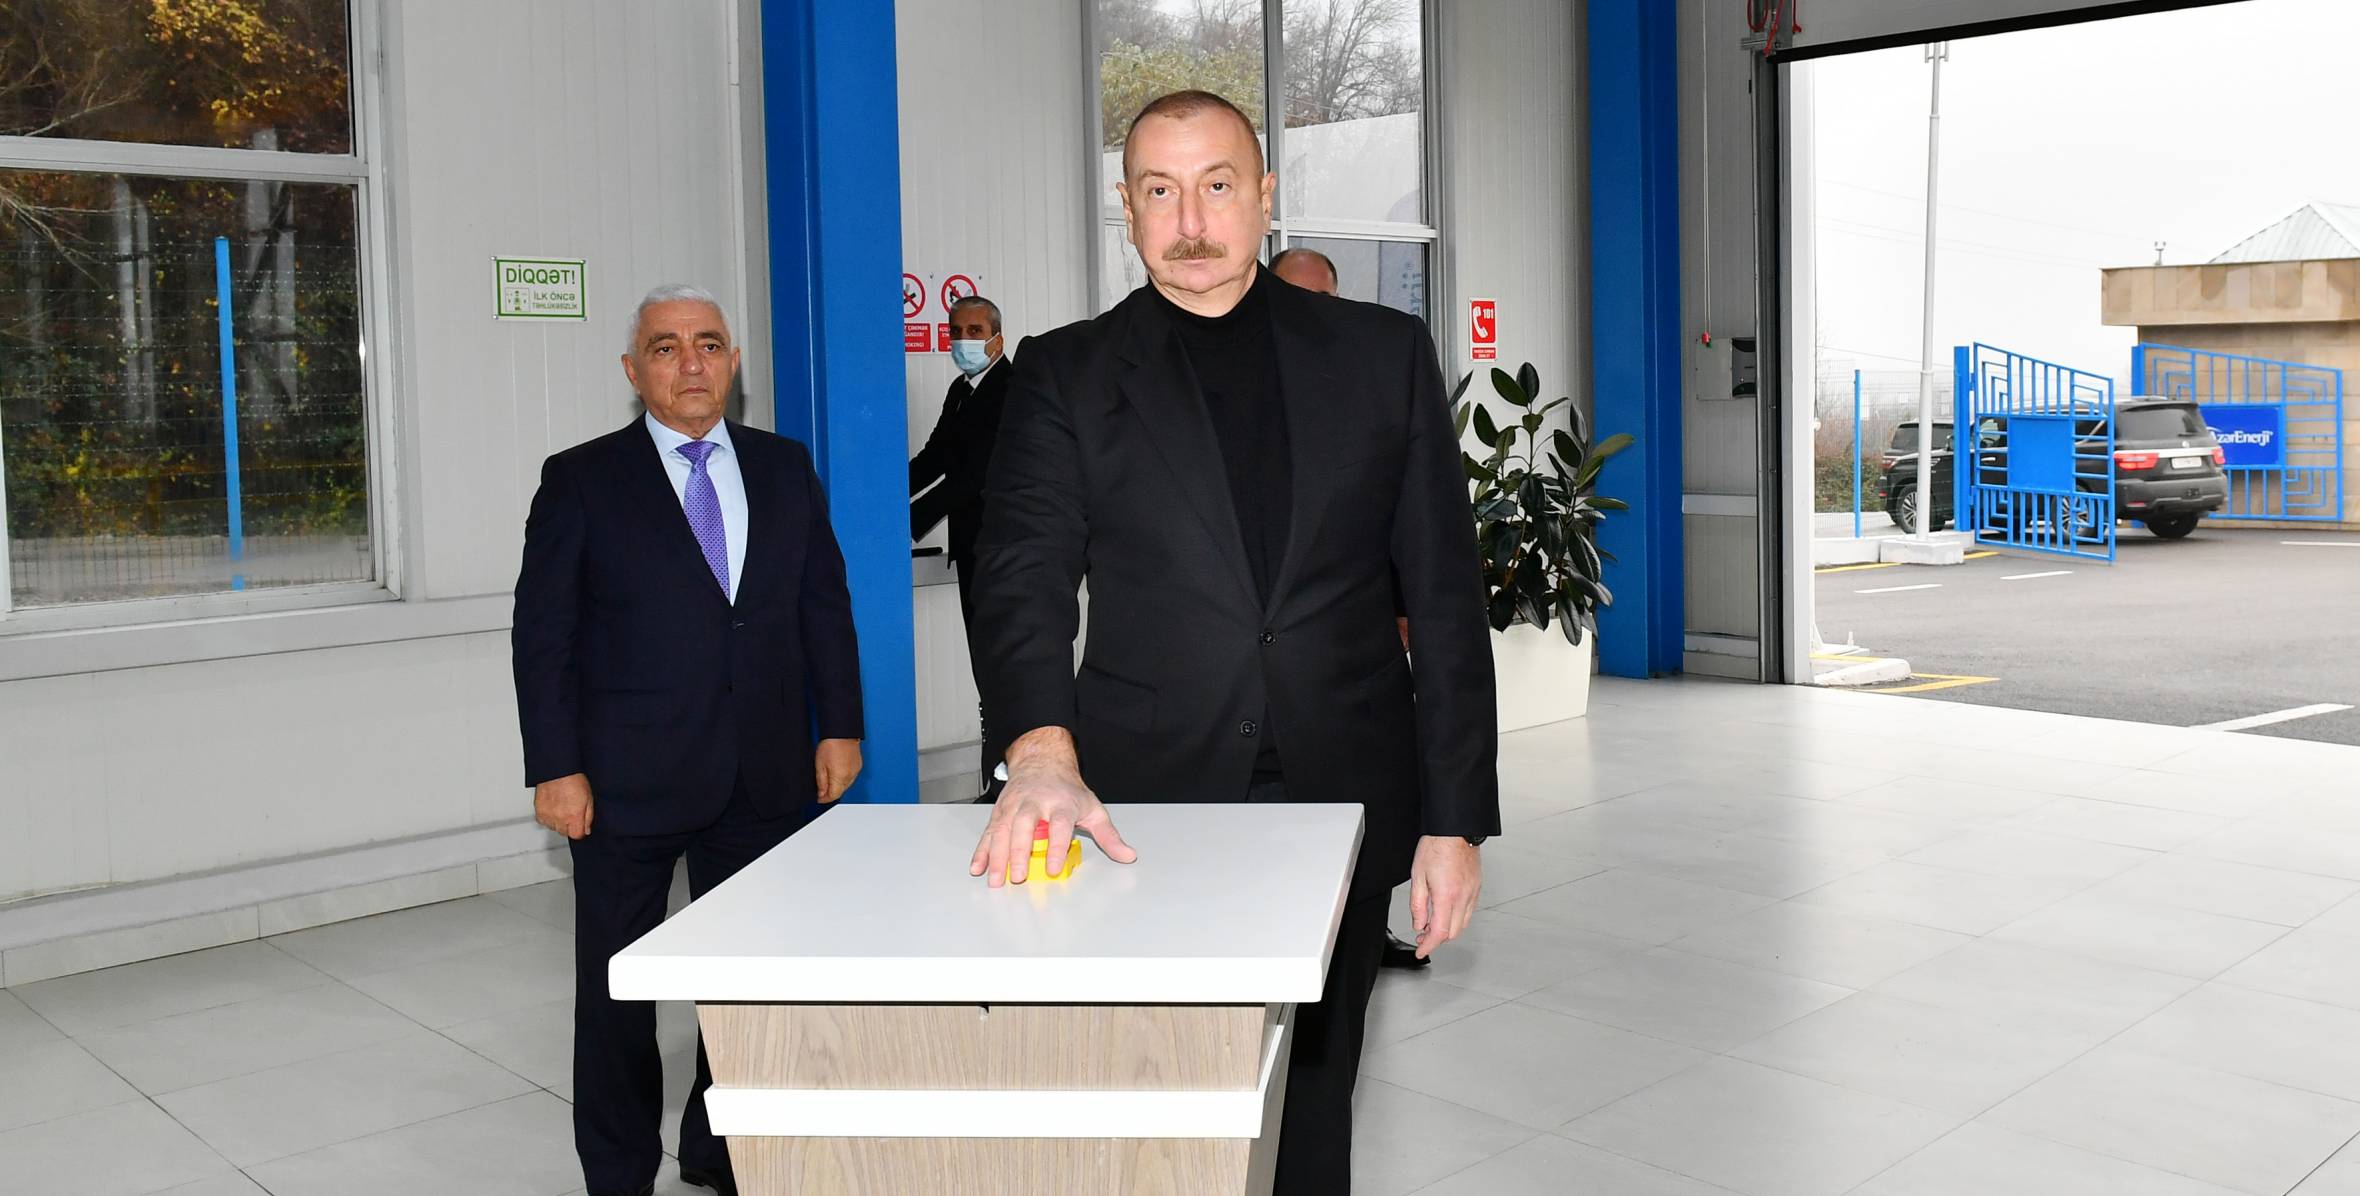 Ilham Aliyev has attended the inauguration of a series of “Oghuz-1”, “Oghuz-2” and “Oghuz-3” small hydropower plants on Dashaghil River in Oghuz